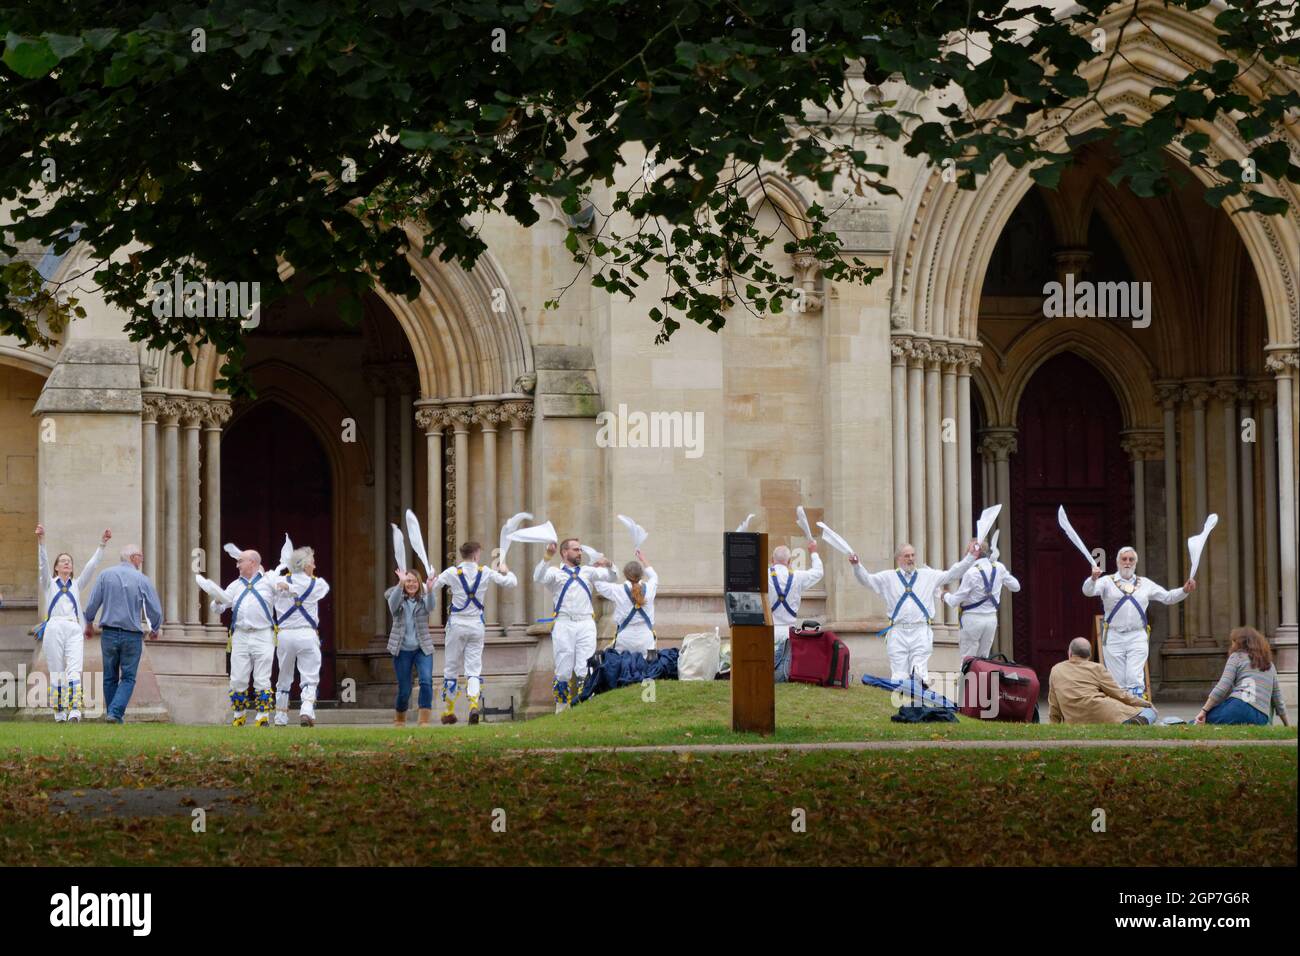 St Albans, Hertfordshire, England, September 21 2021: People watching Morris Dancers perform a traditional folk dance in front of the Cathedral. Stock Photo